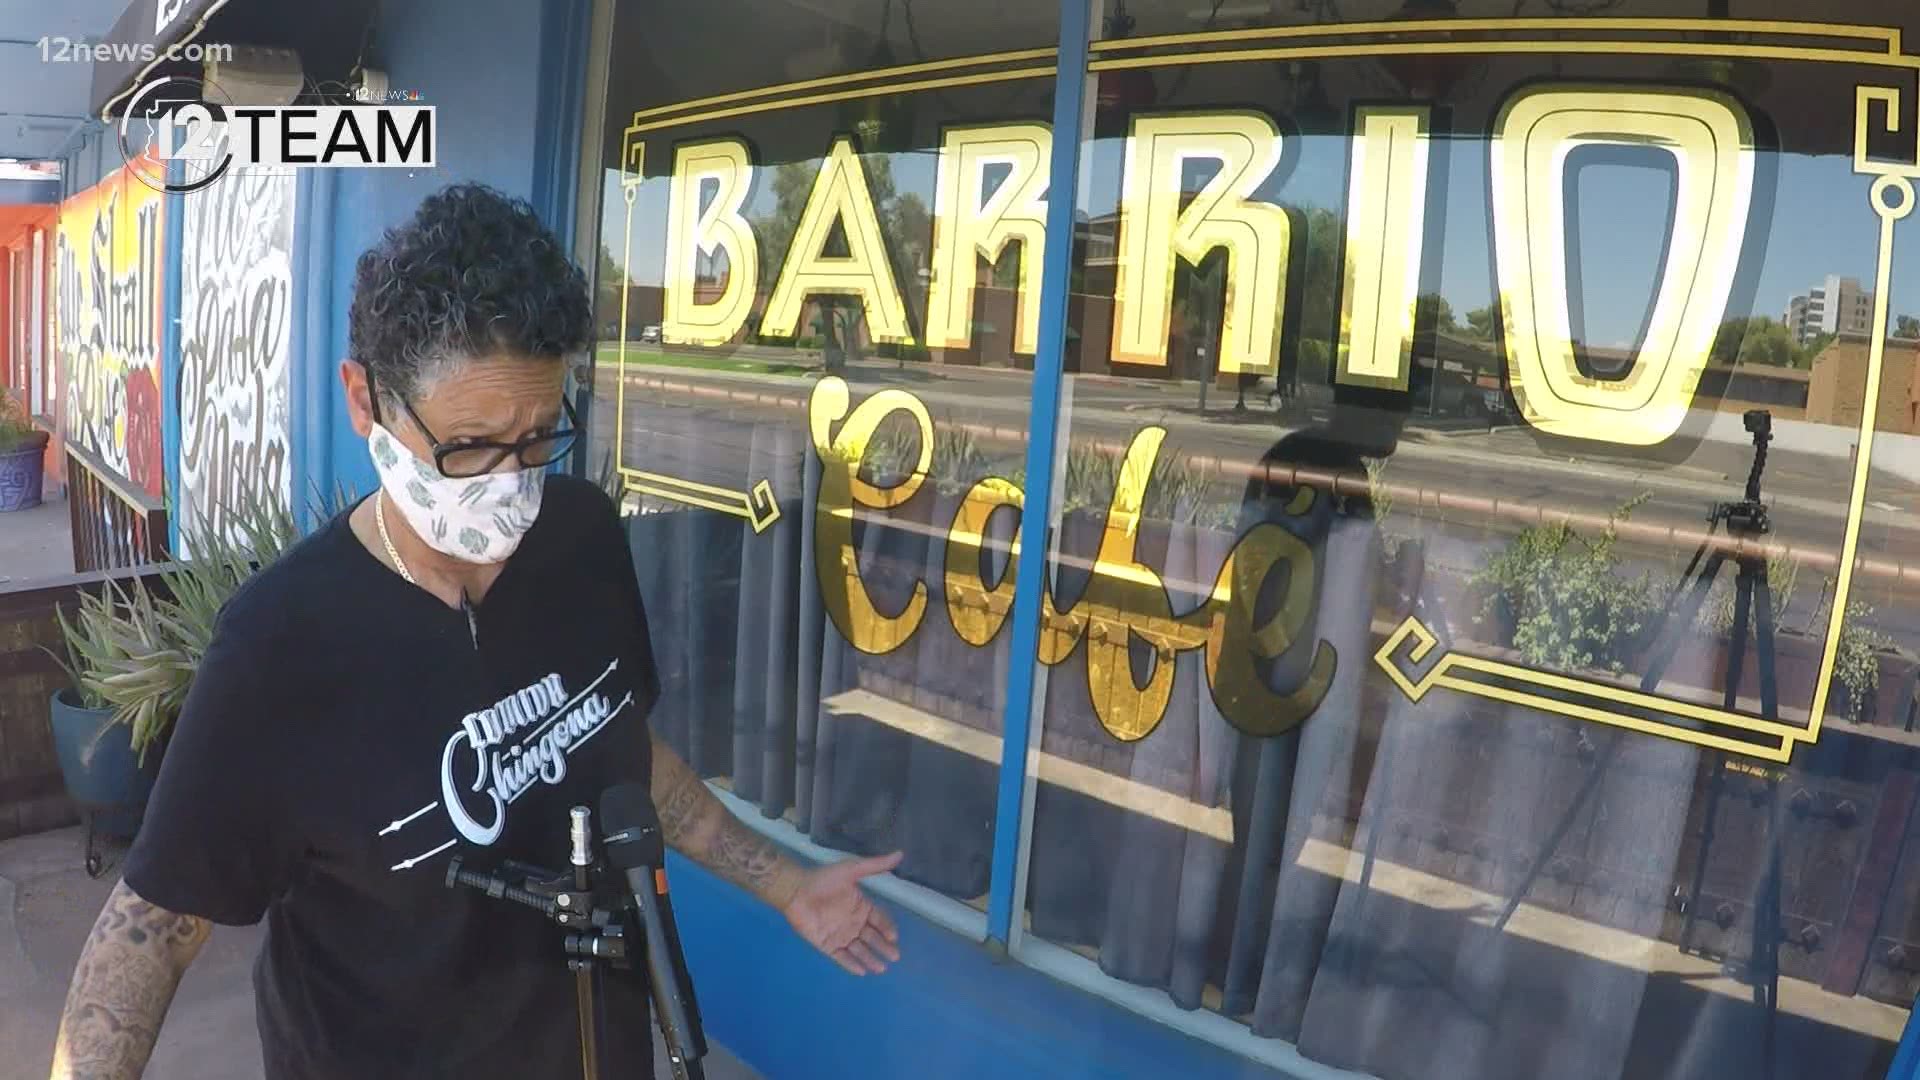 Iconic Valley restaurant, Barrio Cafe, was initially denied a PPP loan and is down to a bare-bones staff. It's not alone. A third of small businesses risk closing.